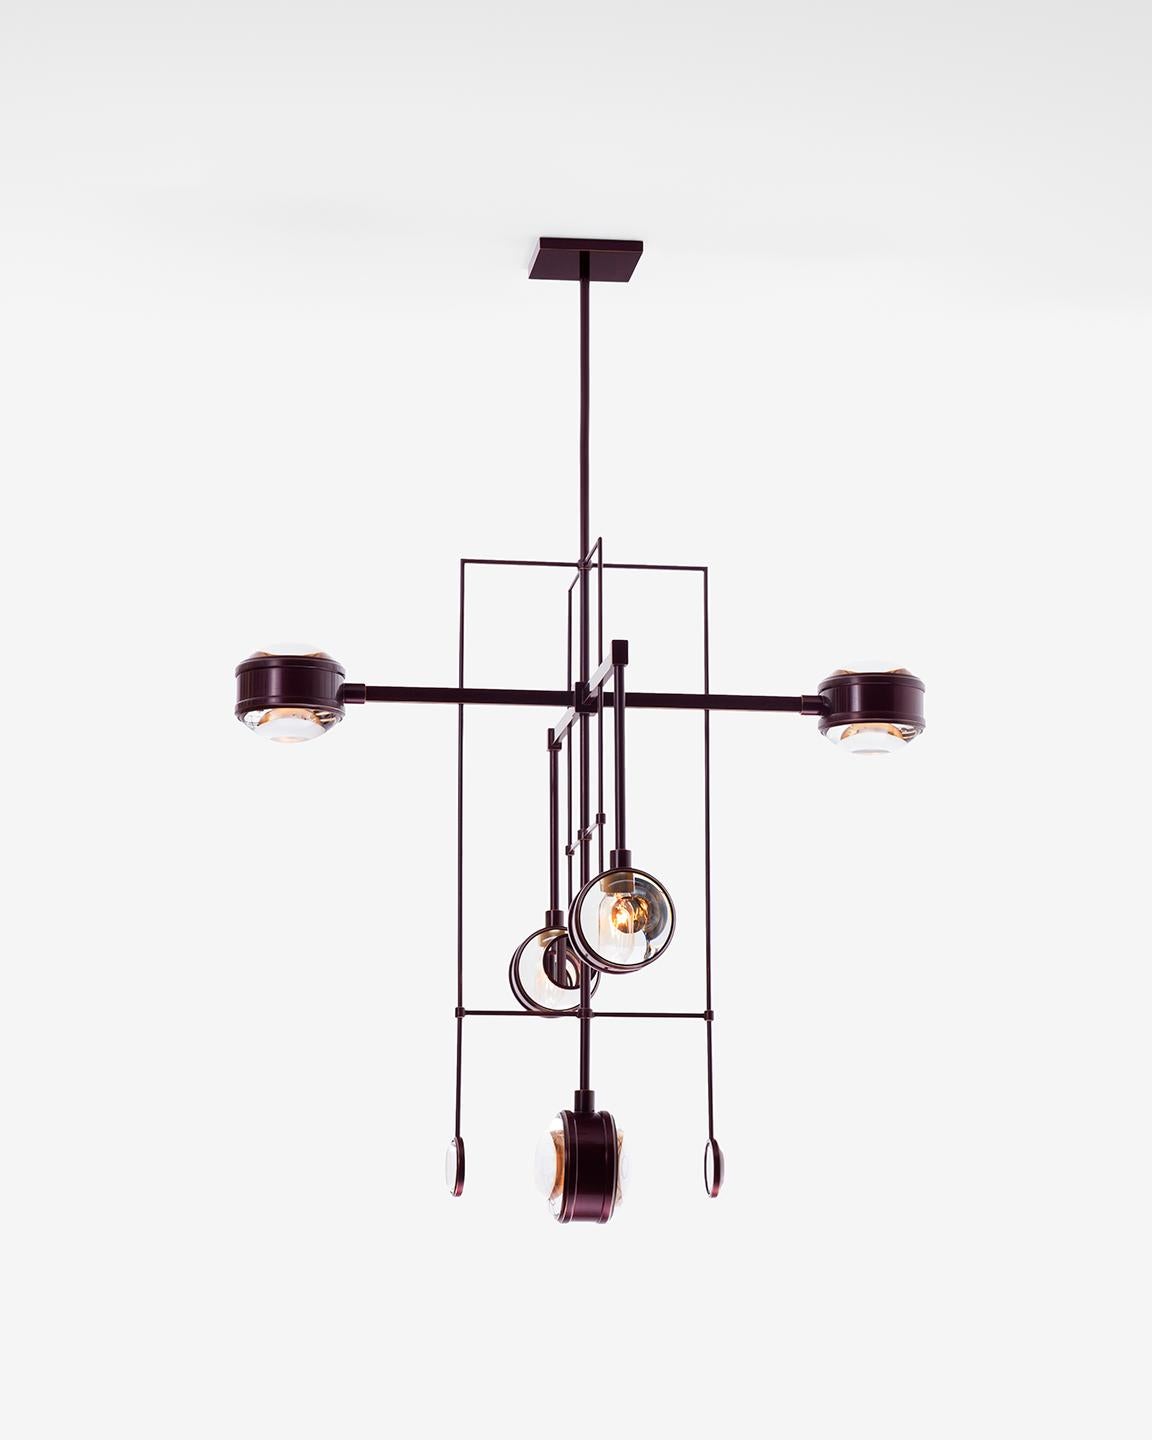 Contemporary HOLLY HUNT Lyra Chandelier No. 5 in Oxblood Lacquer by Alison Berger Glassworks